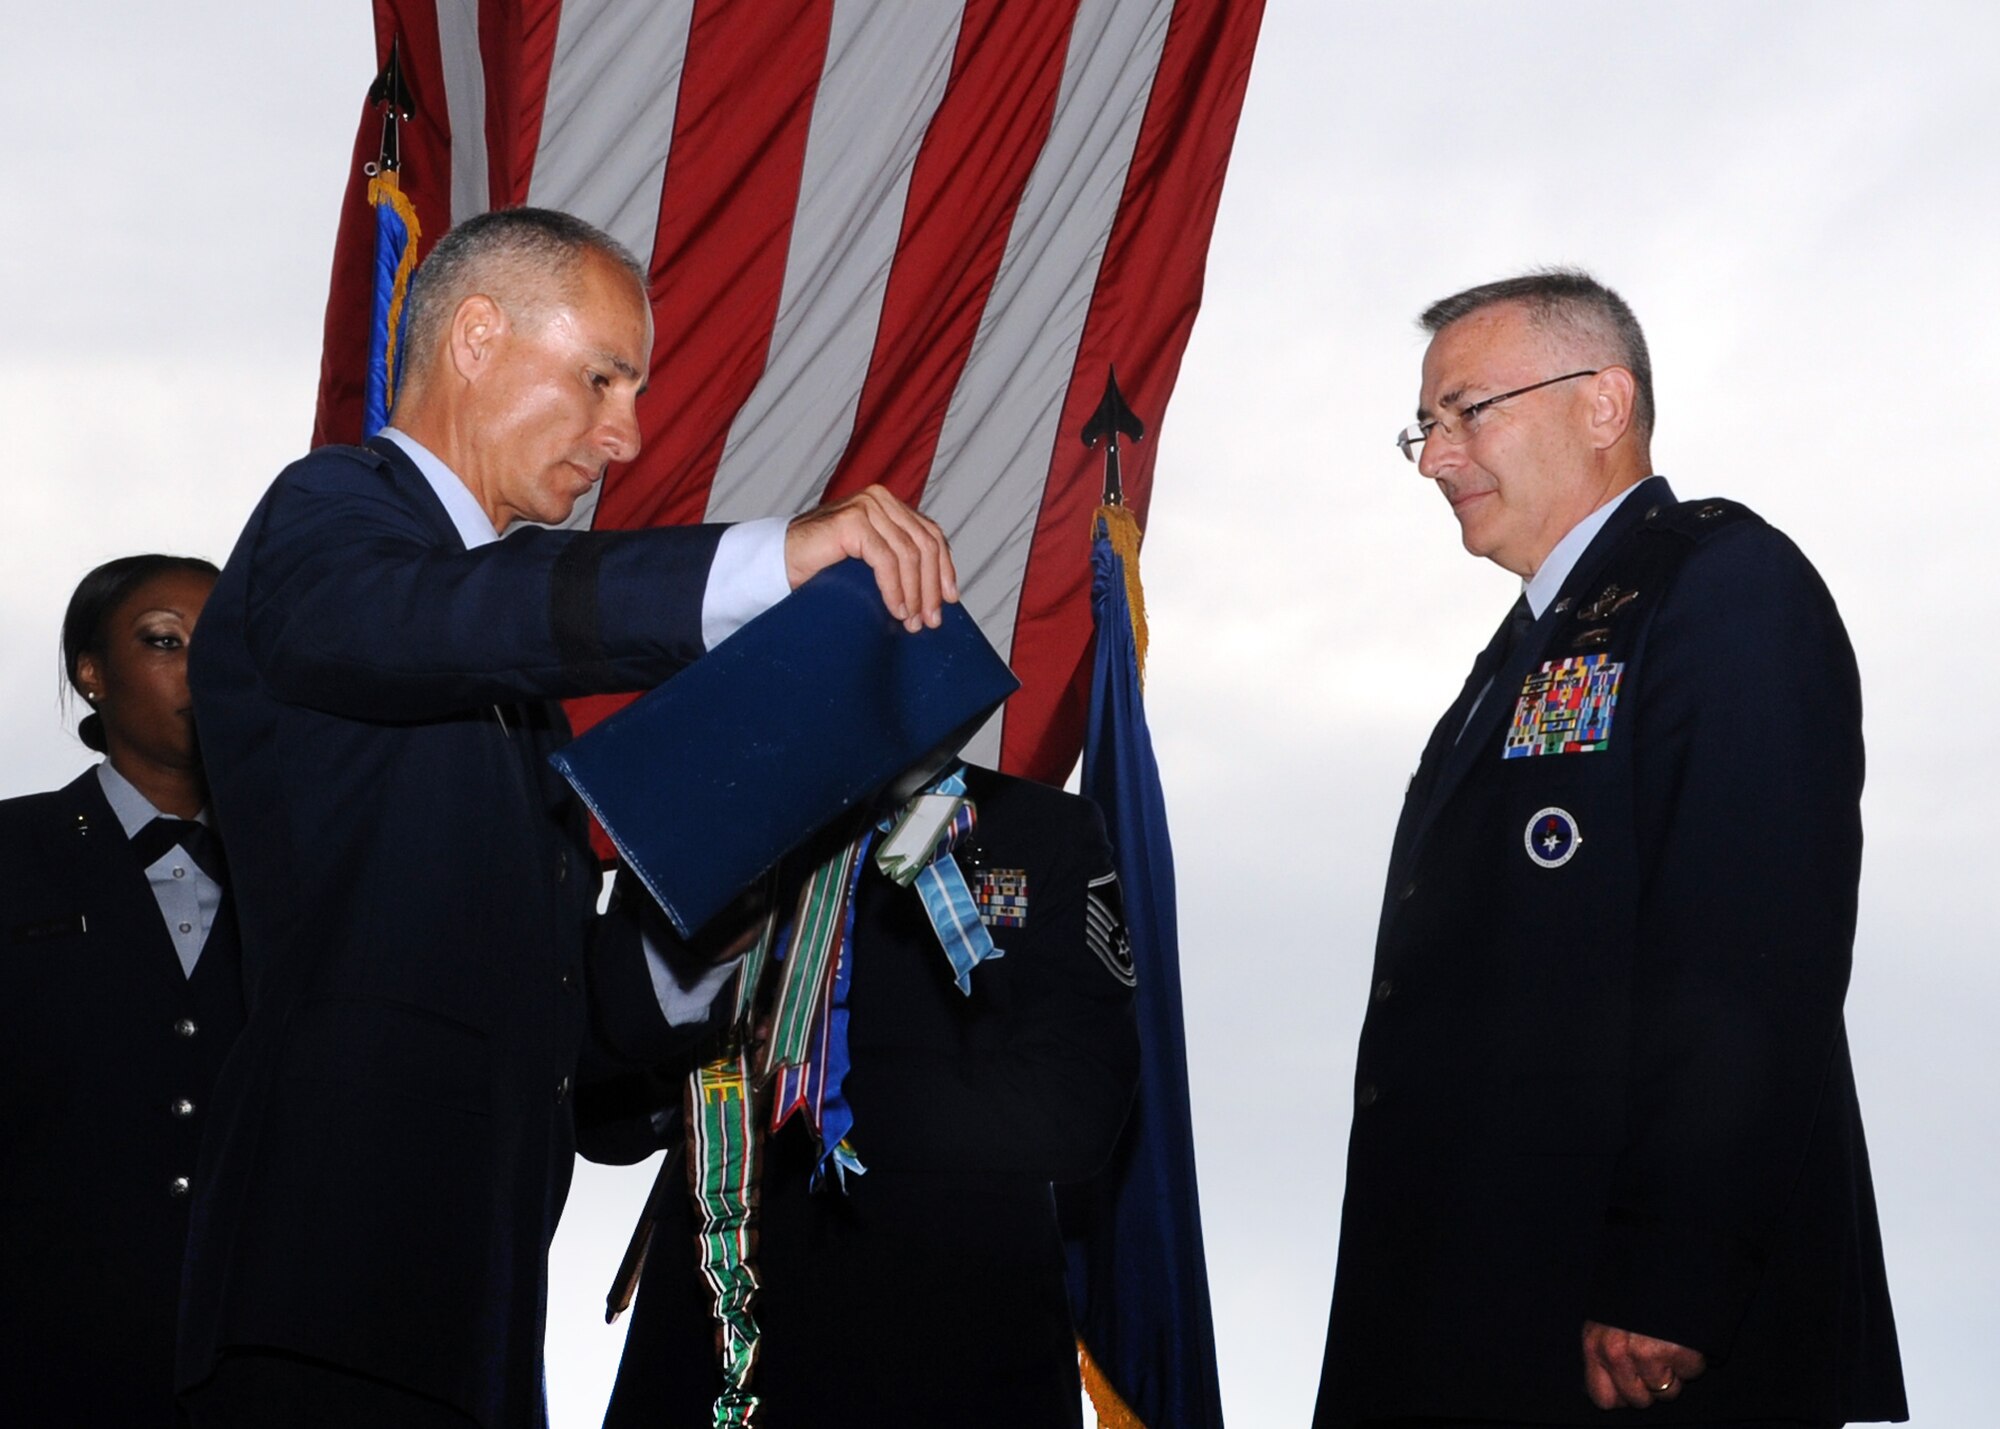 ALTUS AIR FORCE BASE, Okla. – Brig. Gen. Udo K. “Karl” McGregor, commander of the 452nd Air Mobility Wing, March Air Reserve Base, Calif., unsheathes a new 730th Air Mobility Training Squadron flag during the squadron reactivation and assumption of command, while Lt. Col.  Jonathan M. Philebaum, 730th AMTS commander, Altus AFB, waits to assume command of the squadron at hangar 517 June 13, 2012. The 730th AMTS falls under the 452nd Air Mobility Wing at March ARB and is part of the Air Force Reserve Command. (U.S. Air Force photo by Airman 1st Class Franklin R. Ramos / 97th Air Mobility Wing / Released)